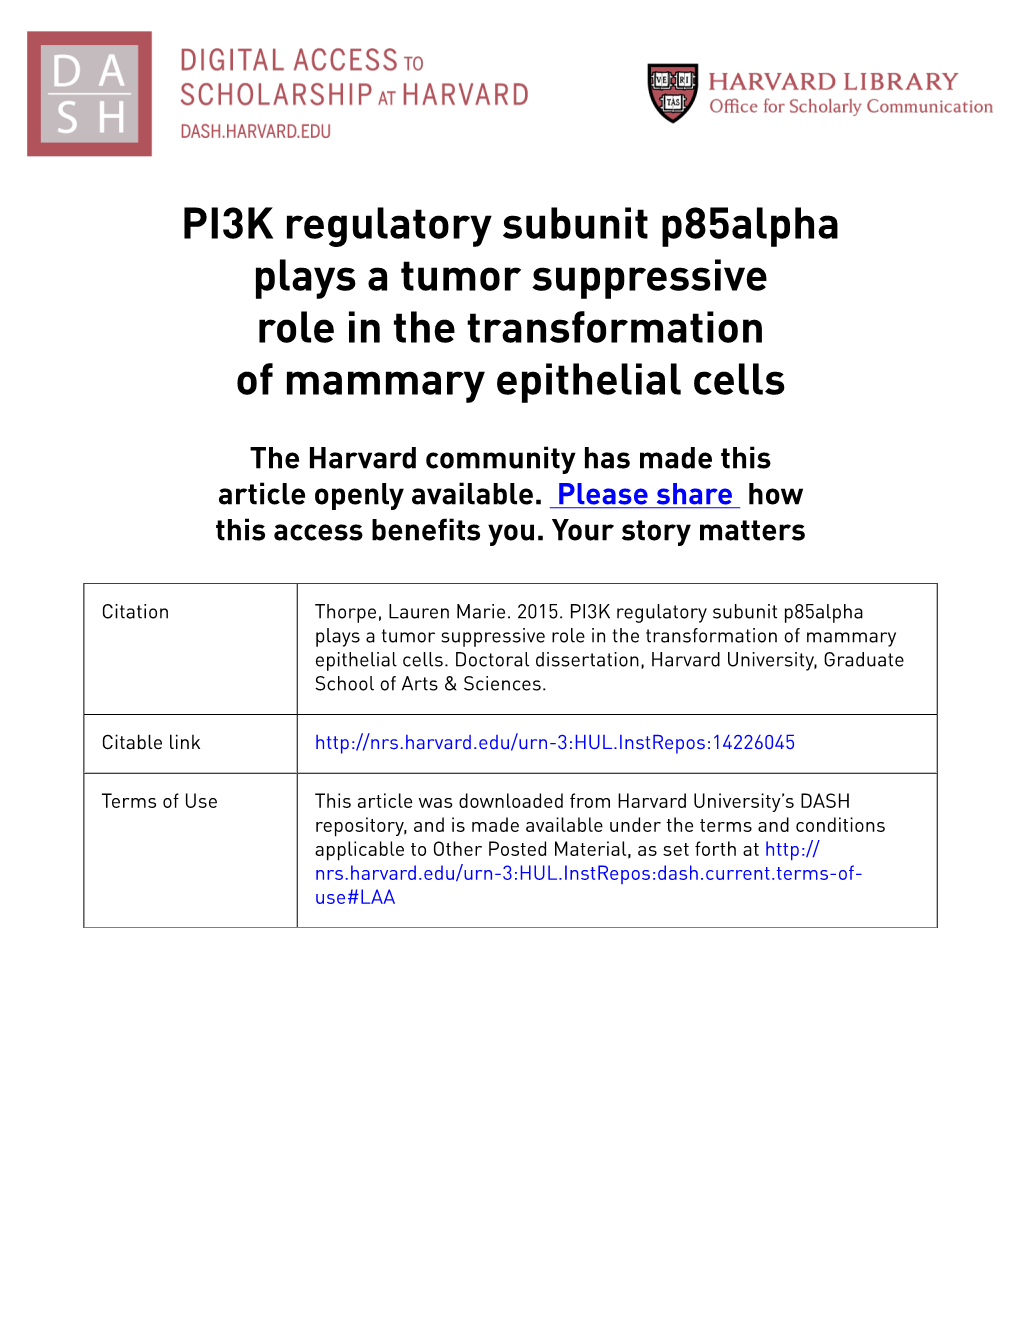 PI3K Regulatory Subunit P85alpha Plays a Tumor Suppressive Role in the Transformation of Mammary Epithelial Cells